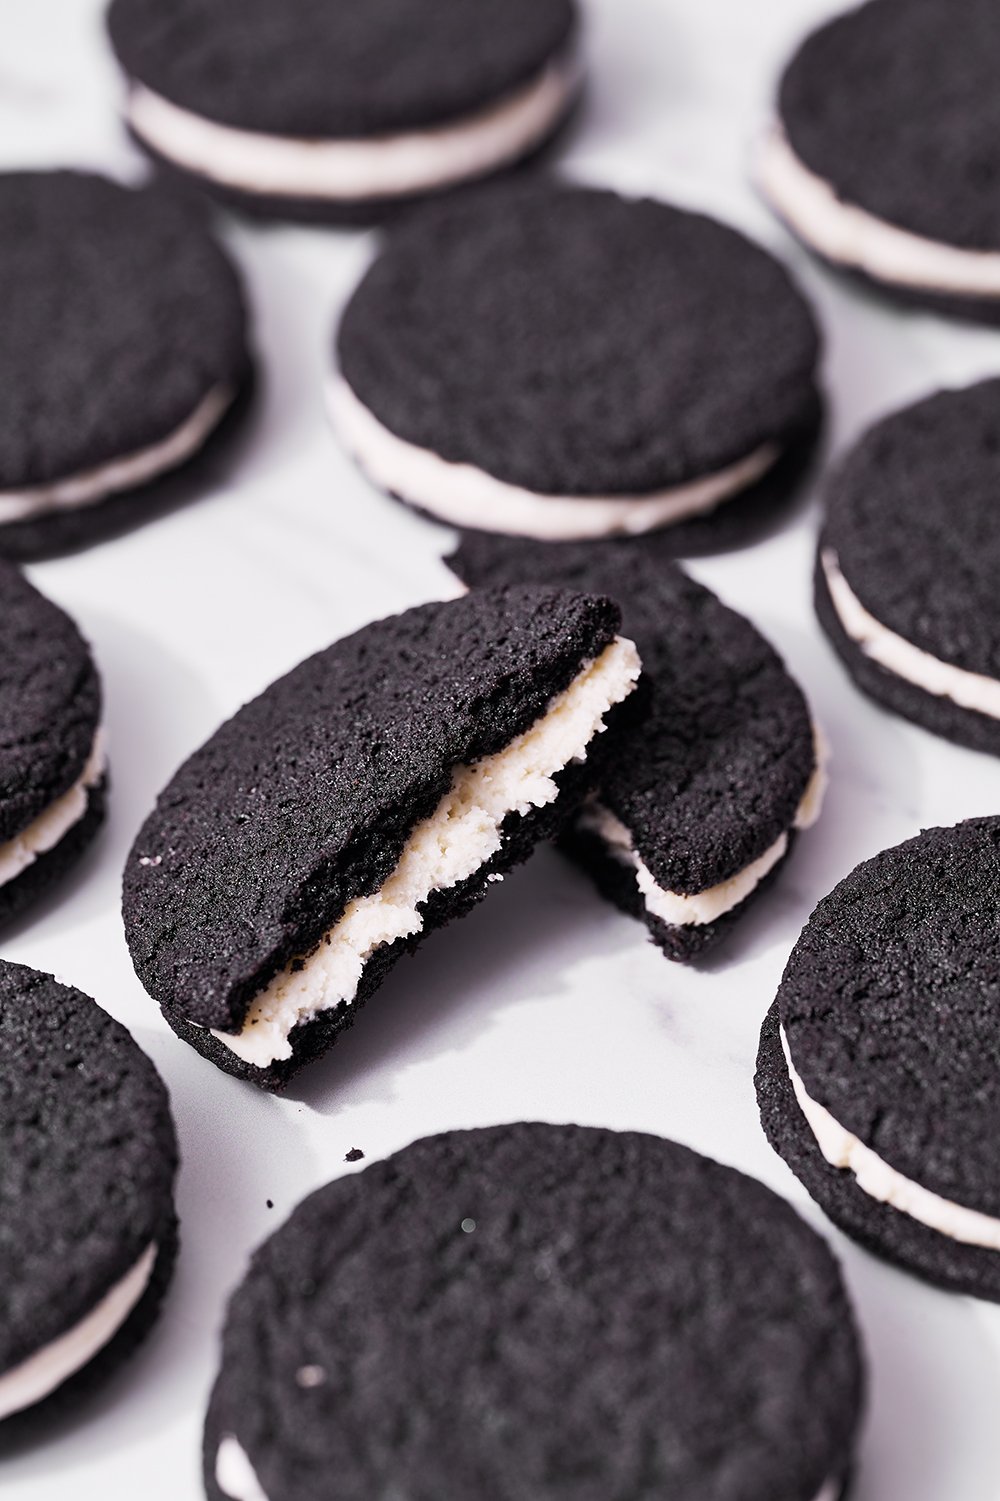 homemade oreo cookies cut in half to see vanilla filling